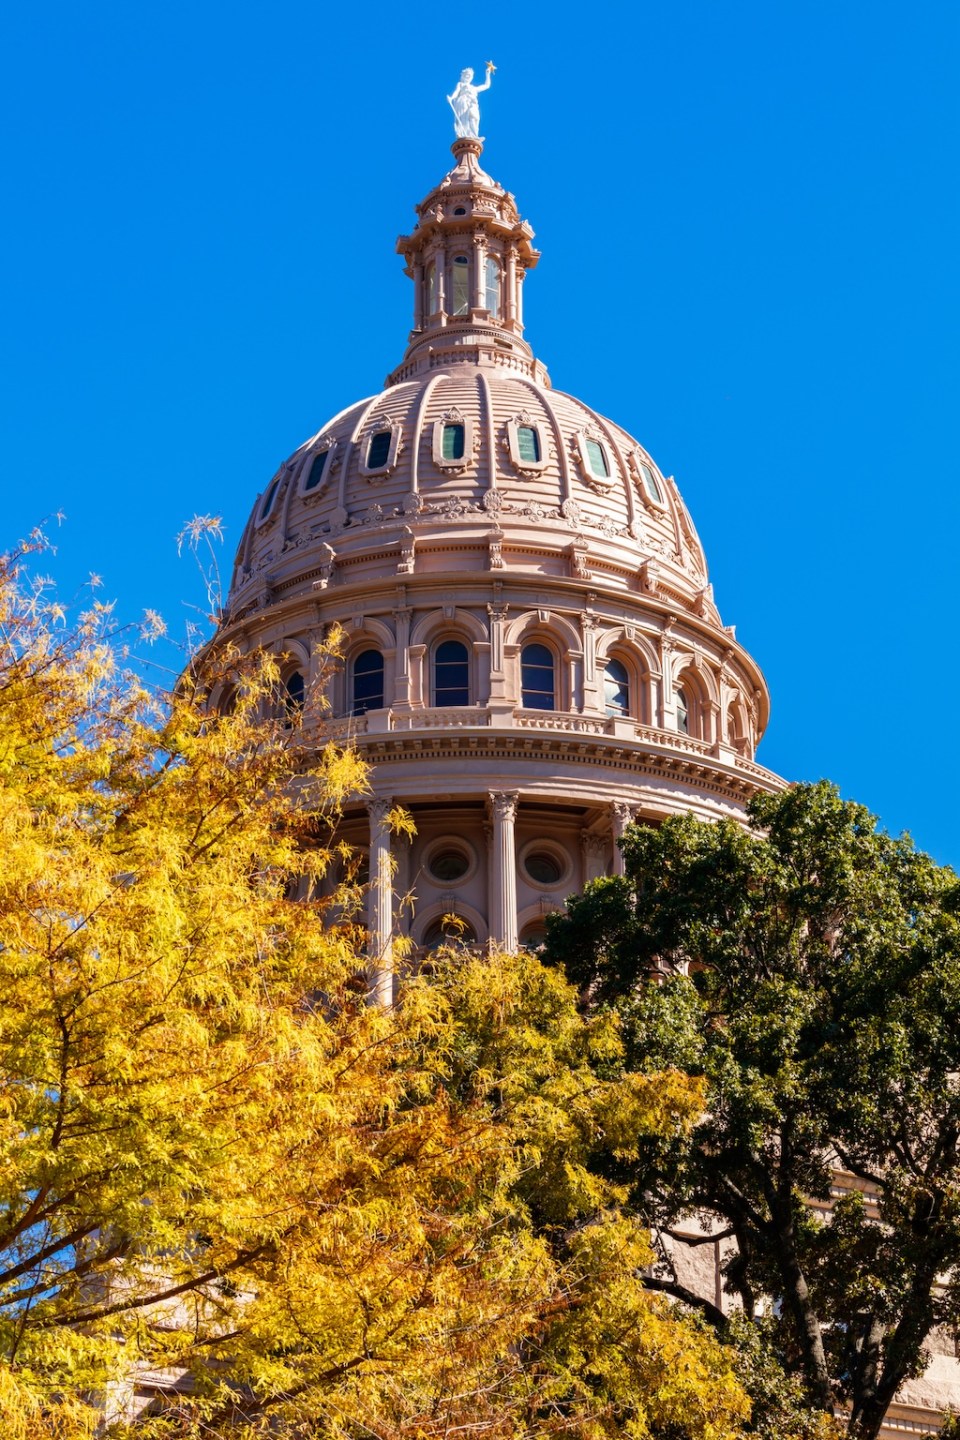 Beautiful Texas State Capitol building located in Austin.